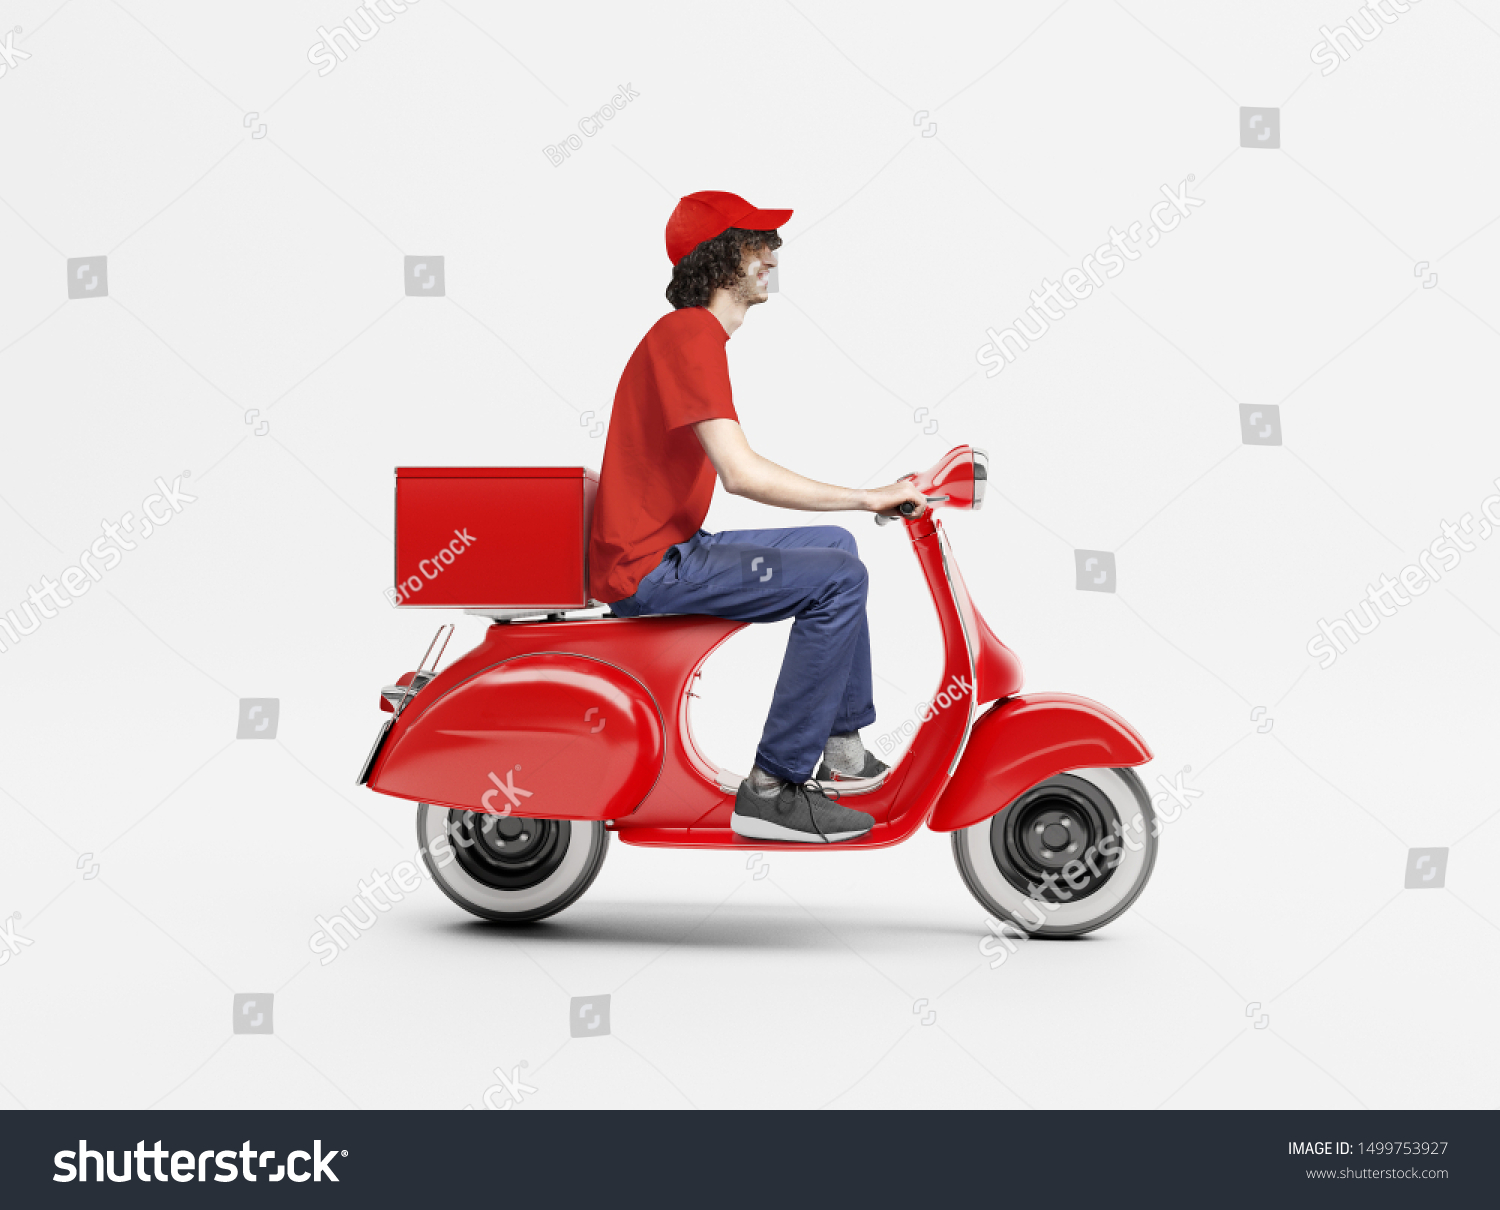 Delivery man with red scooter.  #1499753927